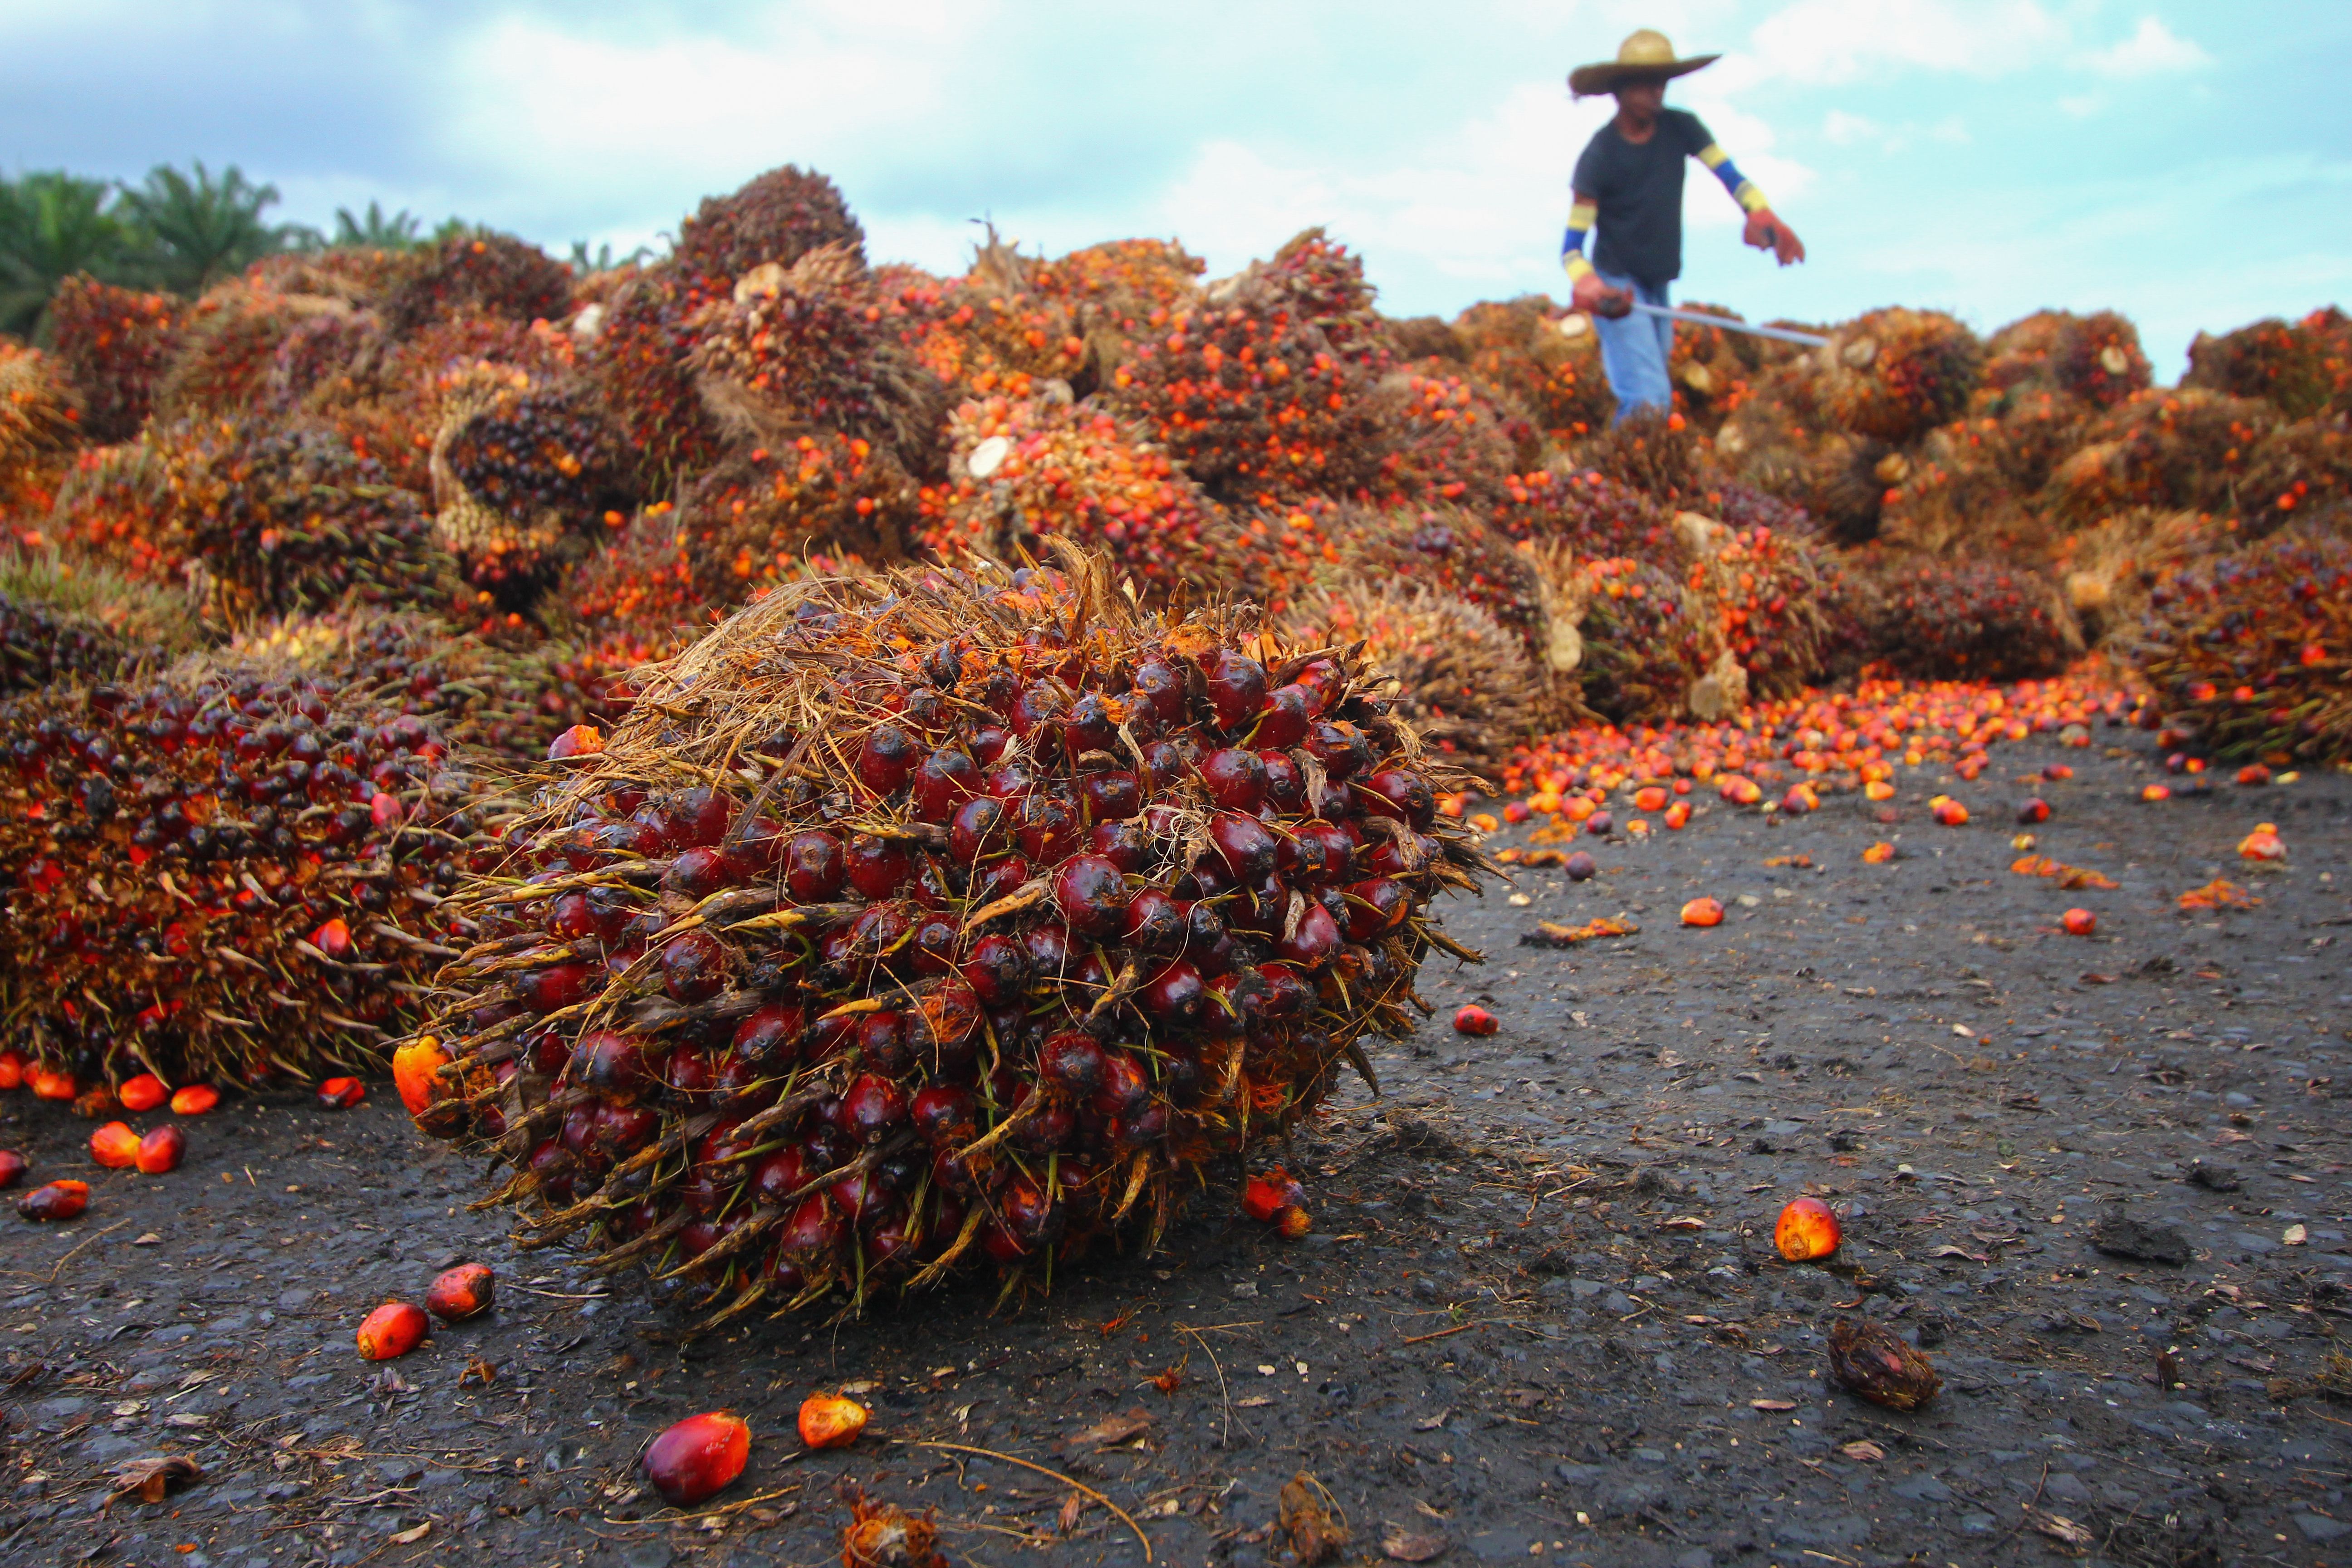 Oil palm fruits with workers in background